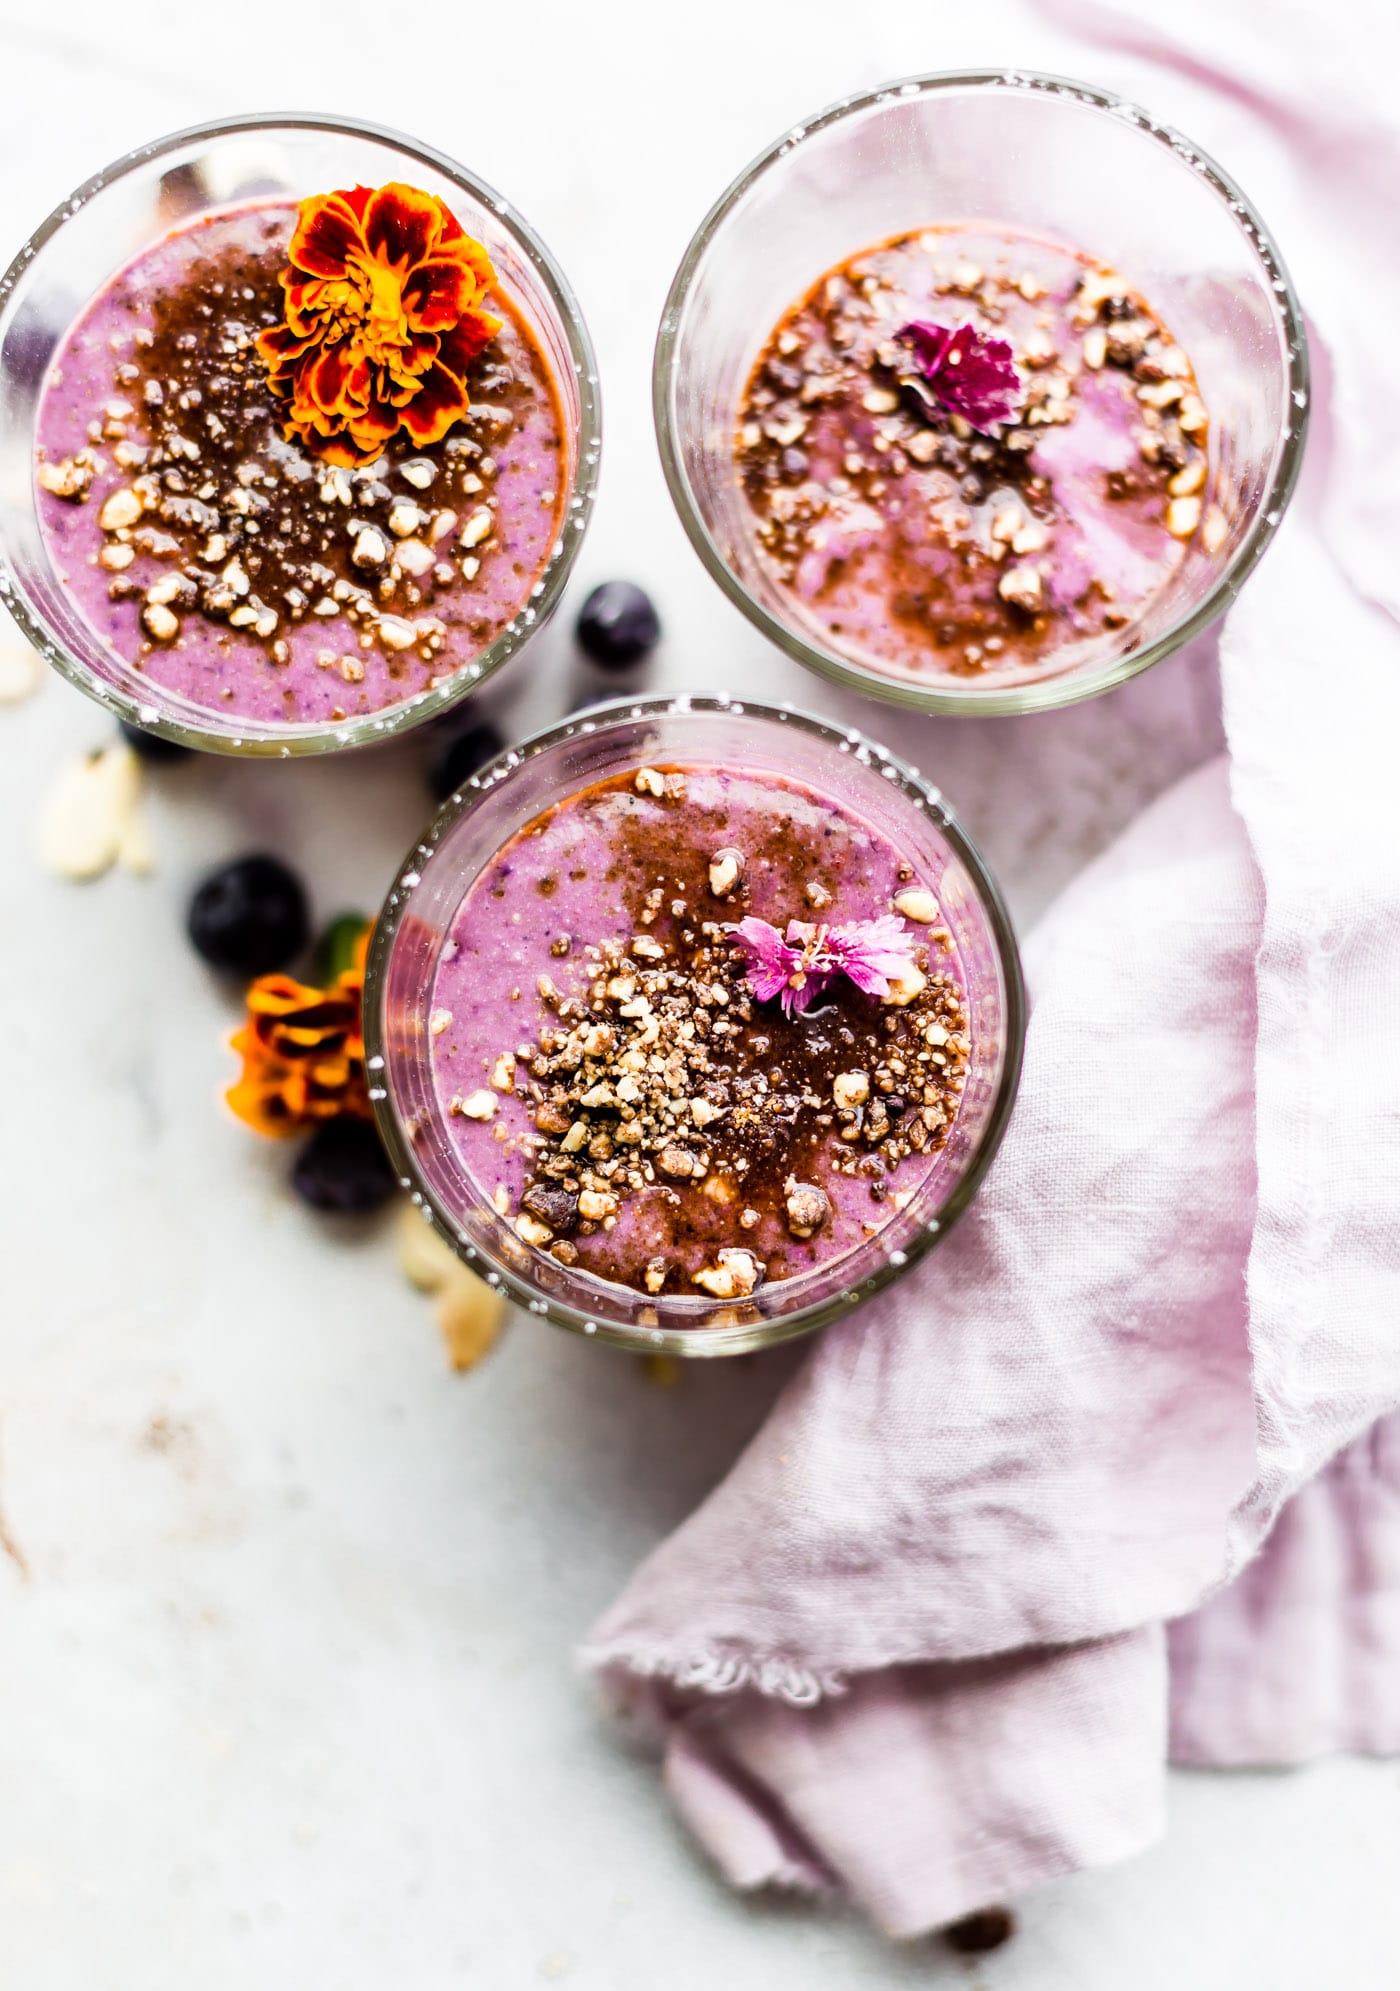 These Almond Berry Mini Cheesecake Smoothies s are packed with real food protein and healthy ingredients. No protein powder needed and Vegan friendly option.  Smoothies make a great healthy breakfast, snack, or dessert.  Berries, almonds, coconut milk, cashew cream or cottage cheese (for the cheesecake part), and a dash of cinnamon make this smoothie recipe filling and wholesome!